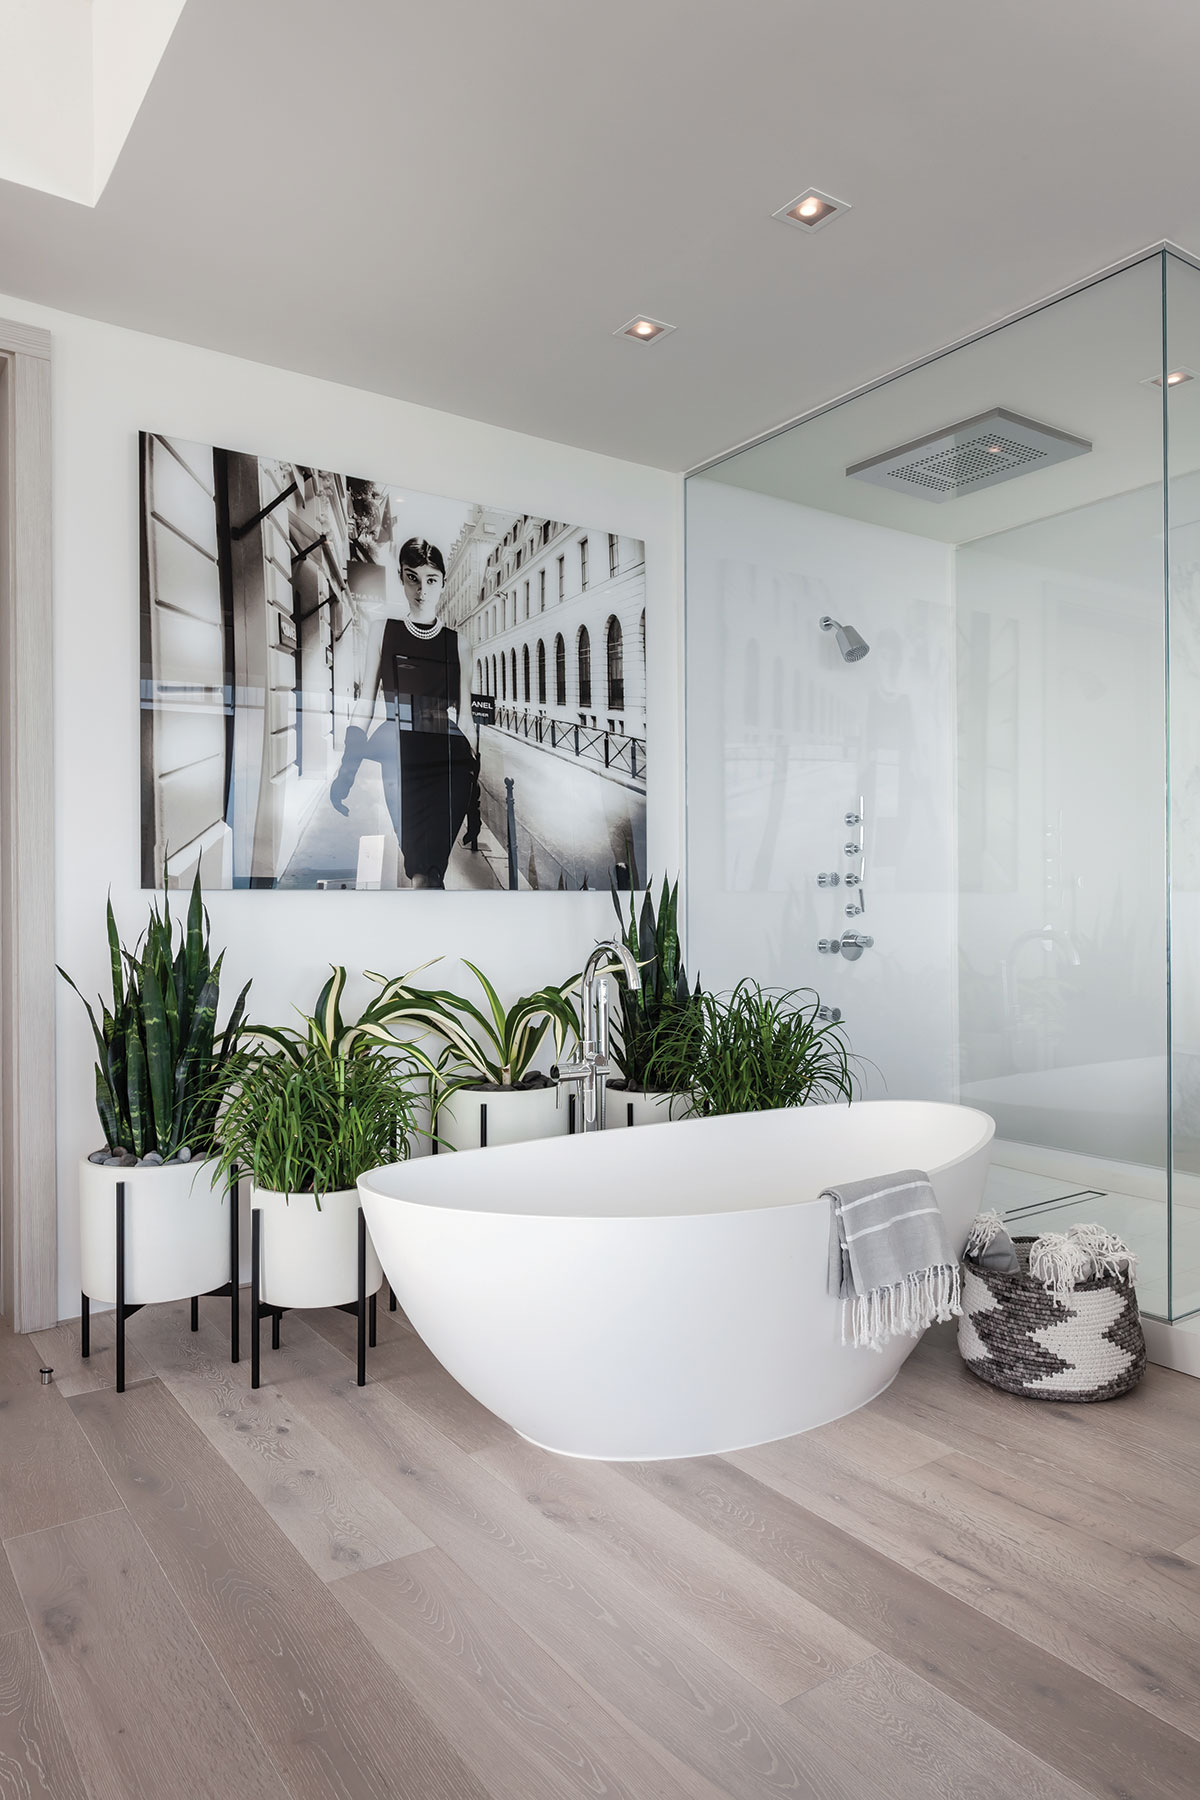 A large black-and-white photograph of Audrey Hepburn by photographer Axel Crieger keeps watch in the master bath over a vessel tub, a "rain" shower and a collection of lush plants.